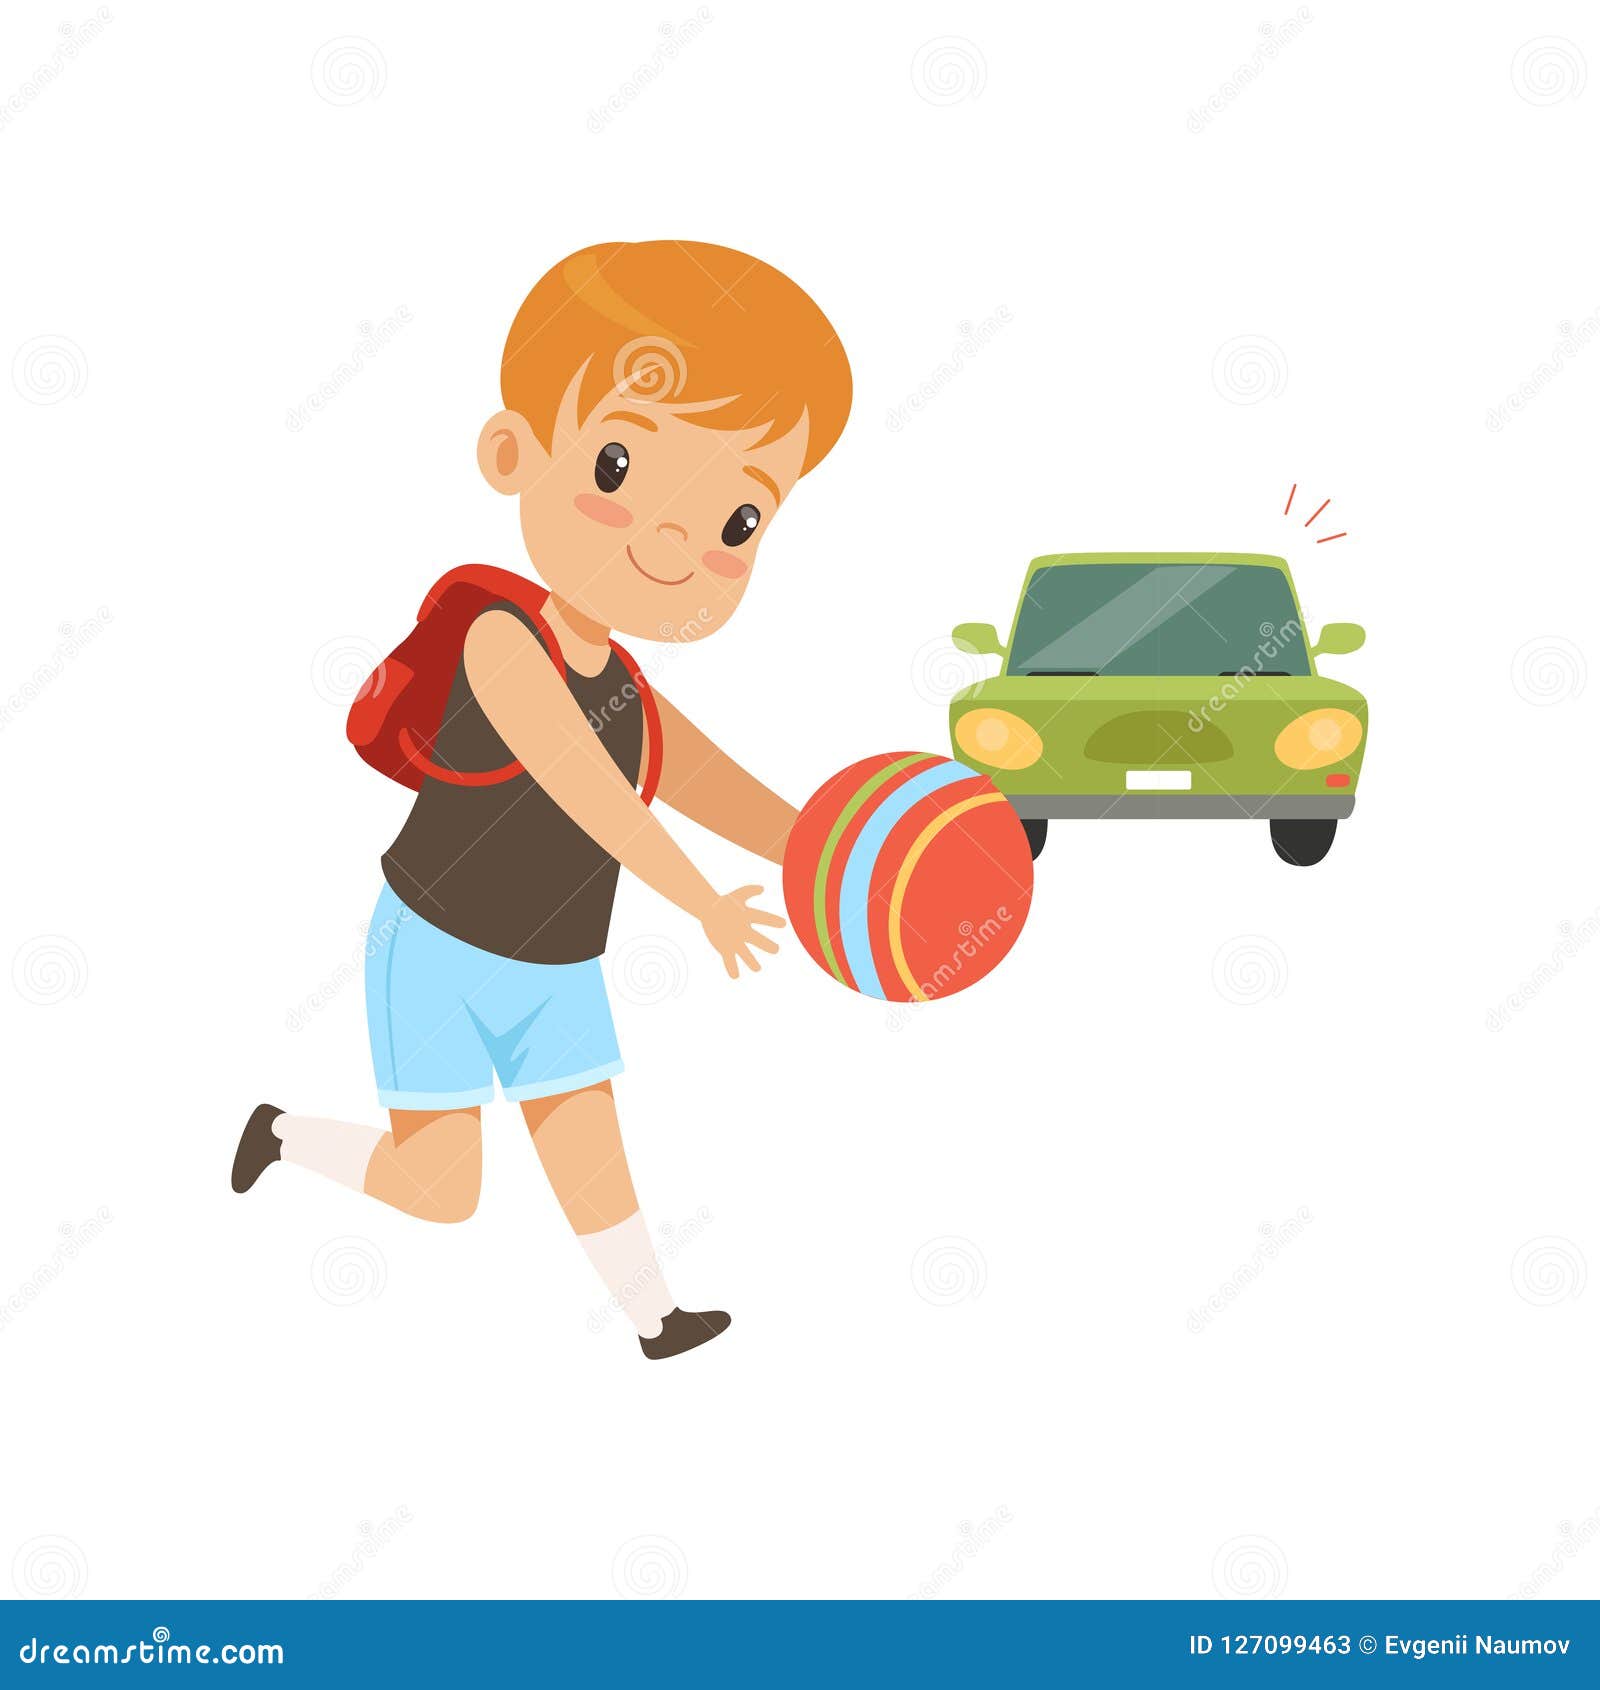 boy playing ball in front of moving car, kid in dangerous situation   on a white background